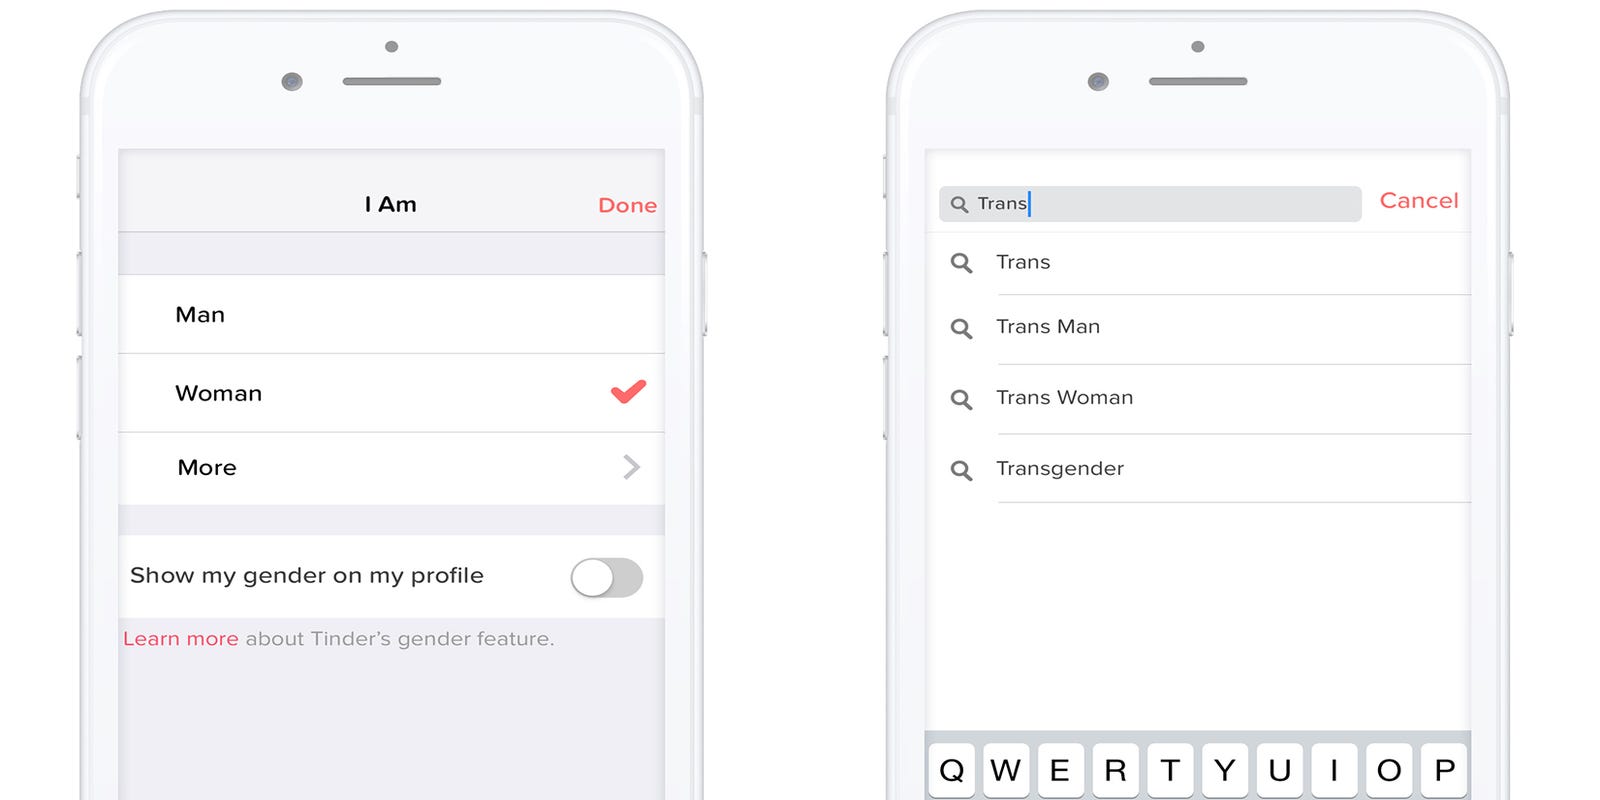 What You Need To Know About Tinder S New Gender Identity Terms